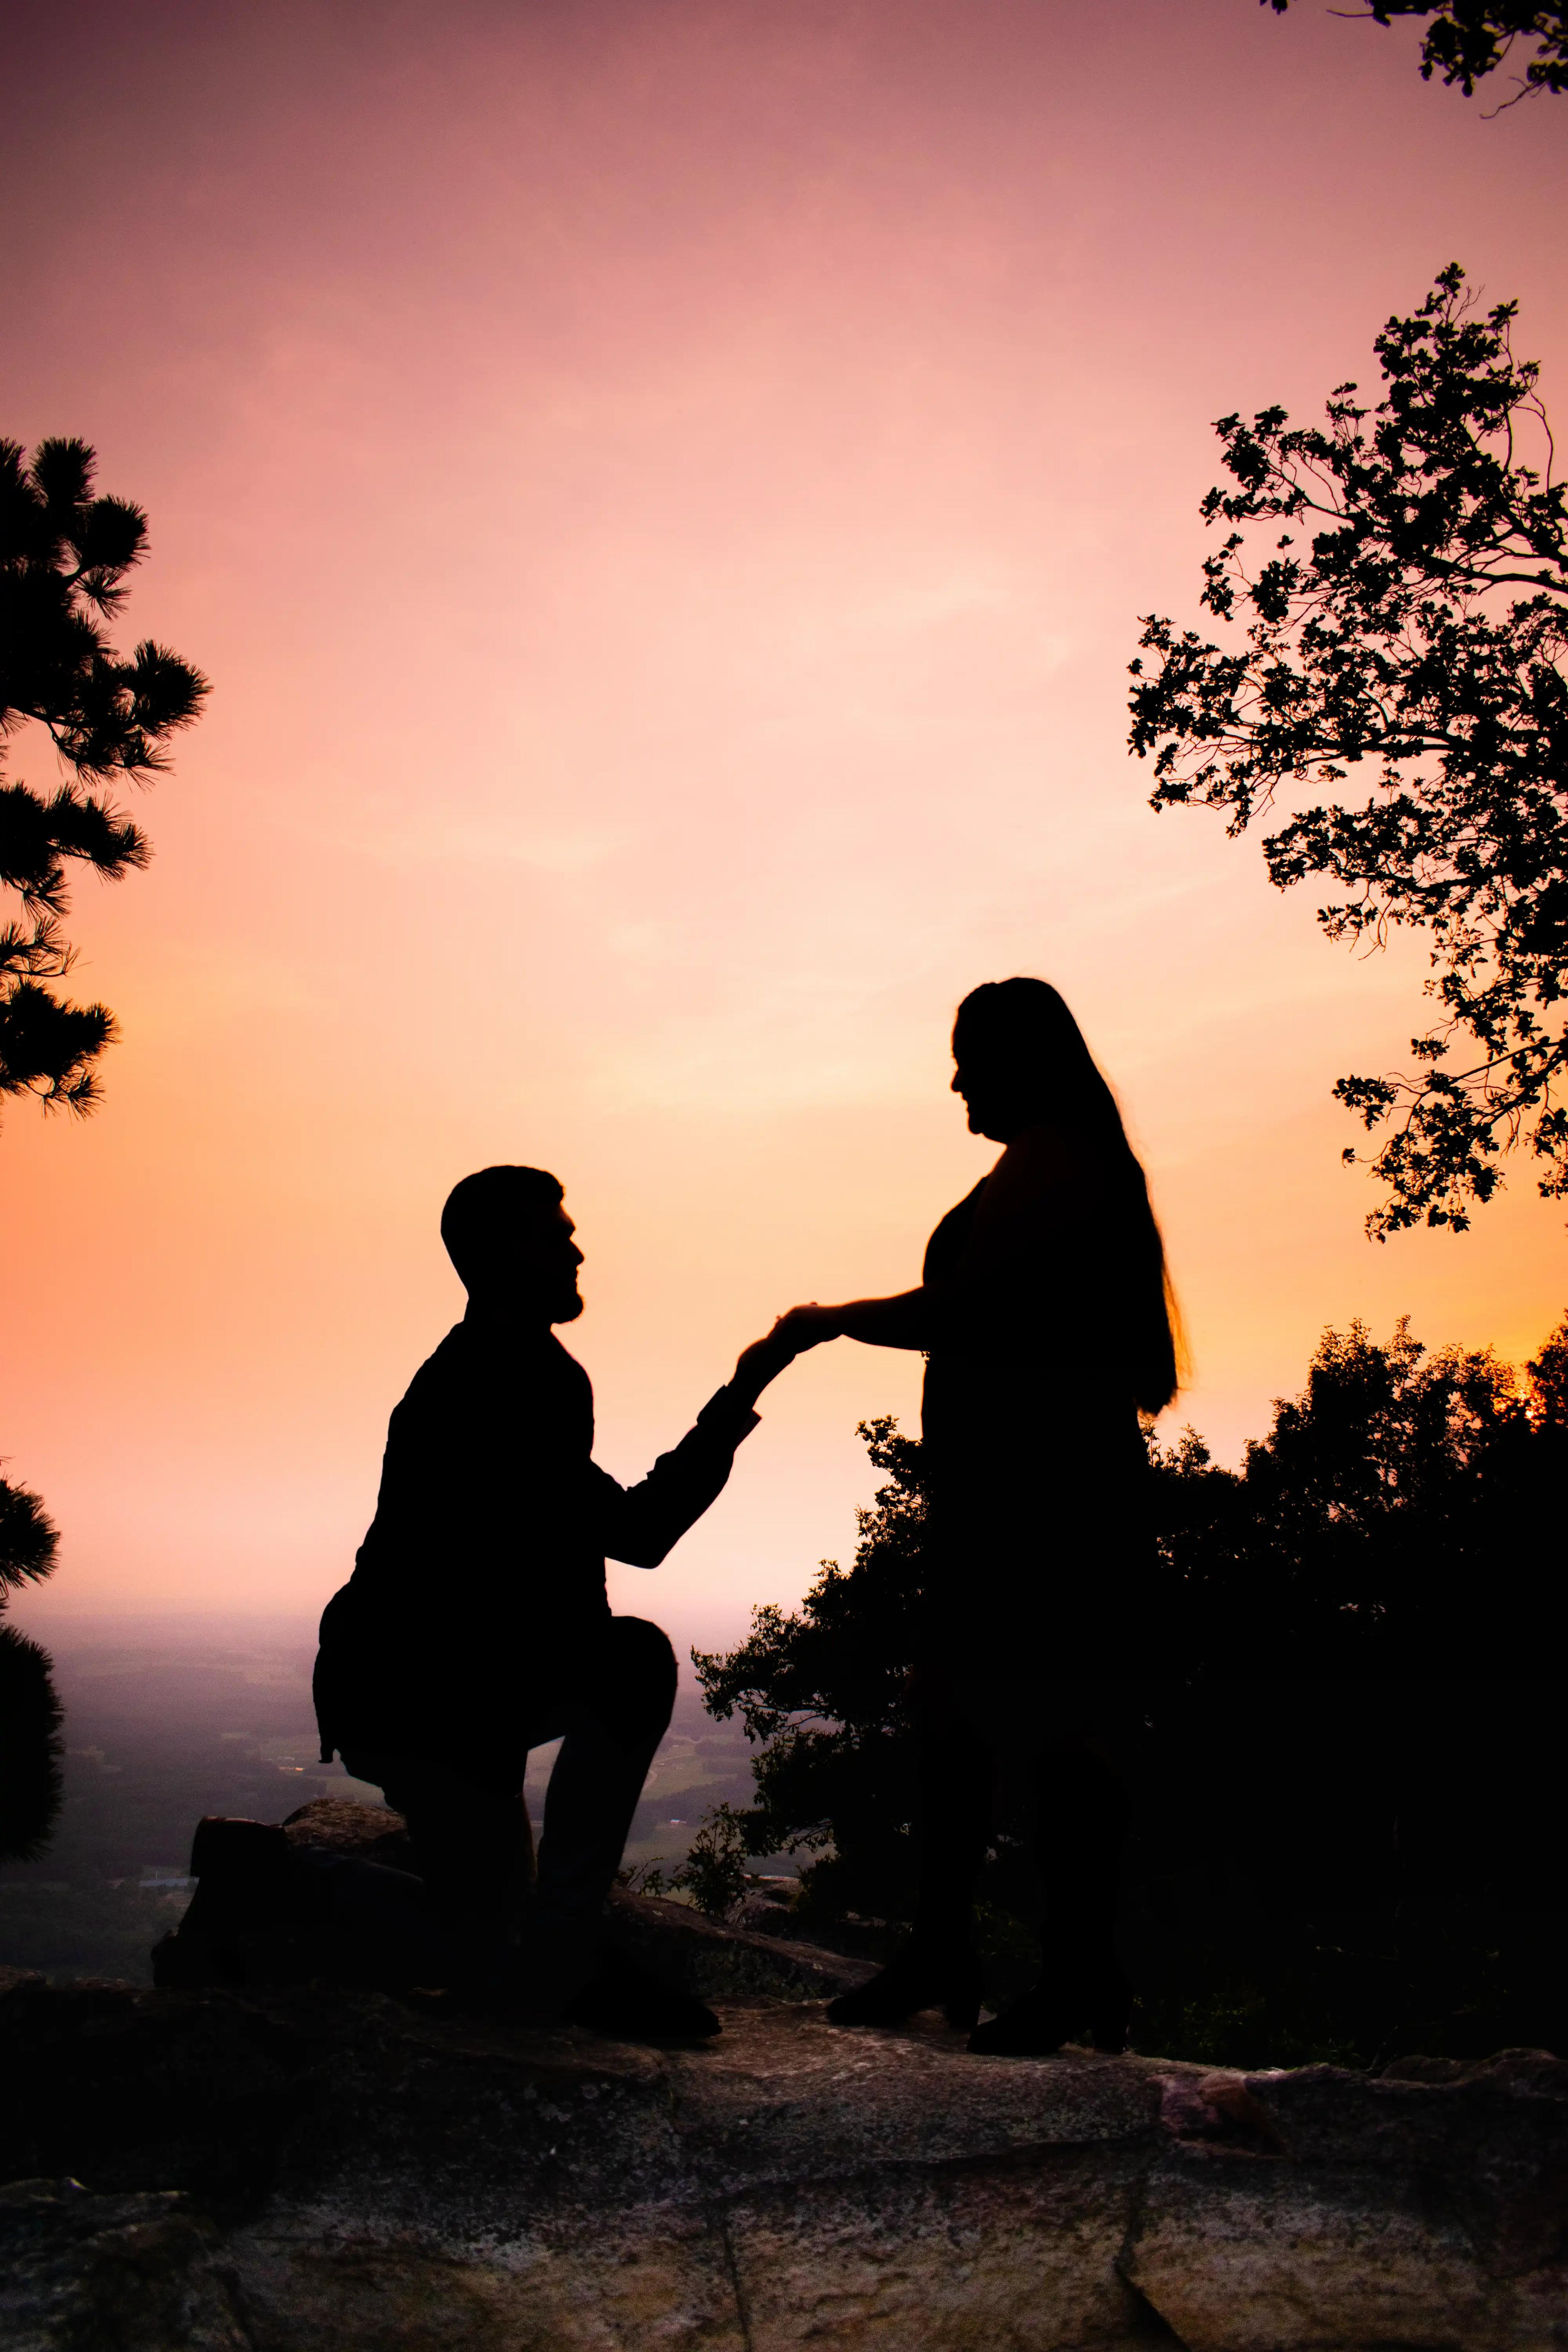 the groom silhouetted by the sunset getting down on one knee to propose to his future wife.